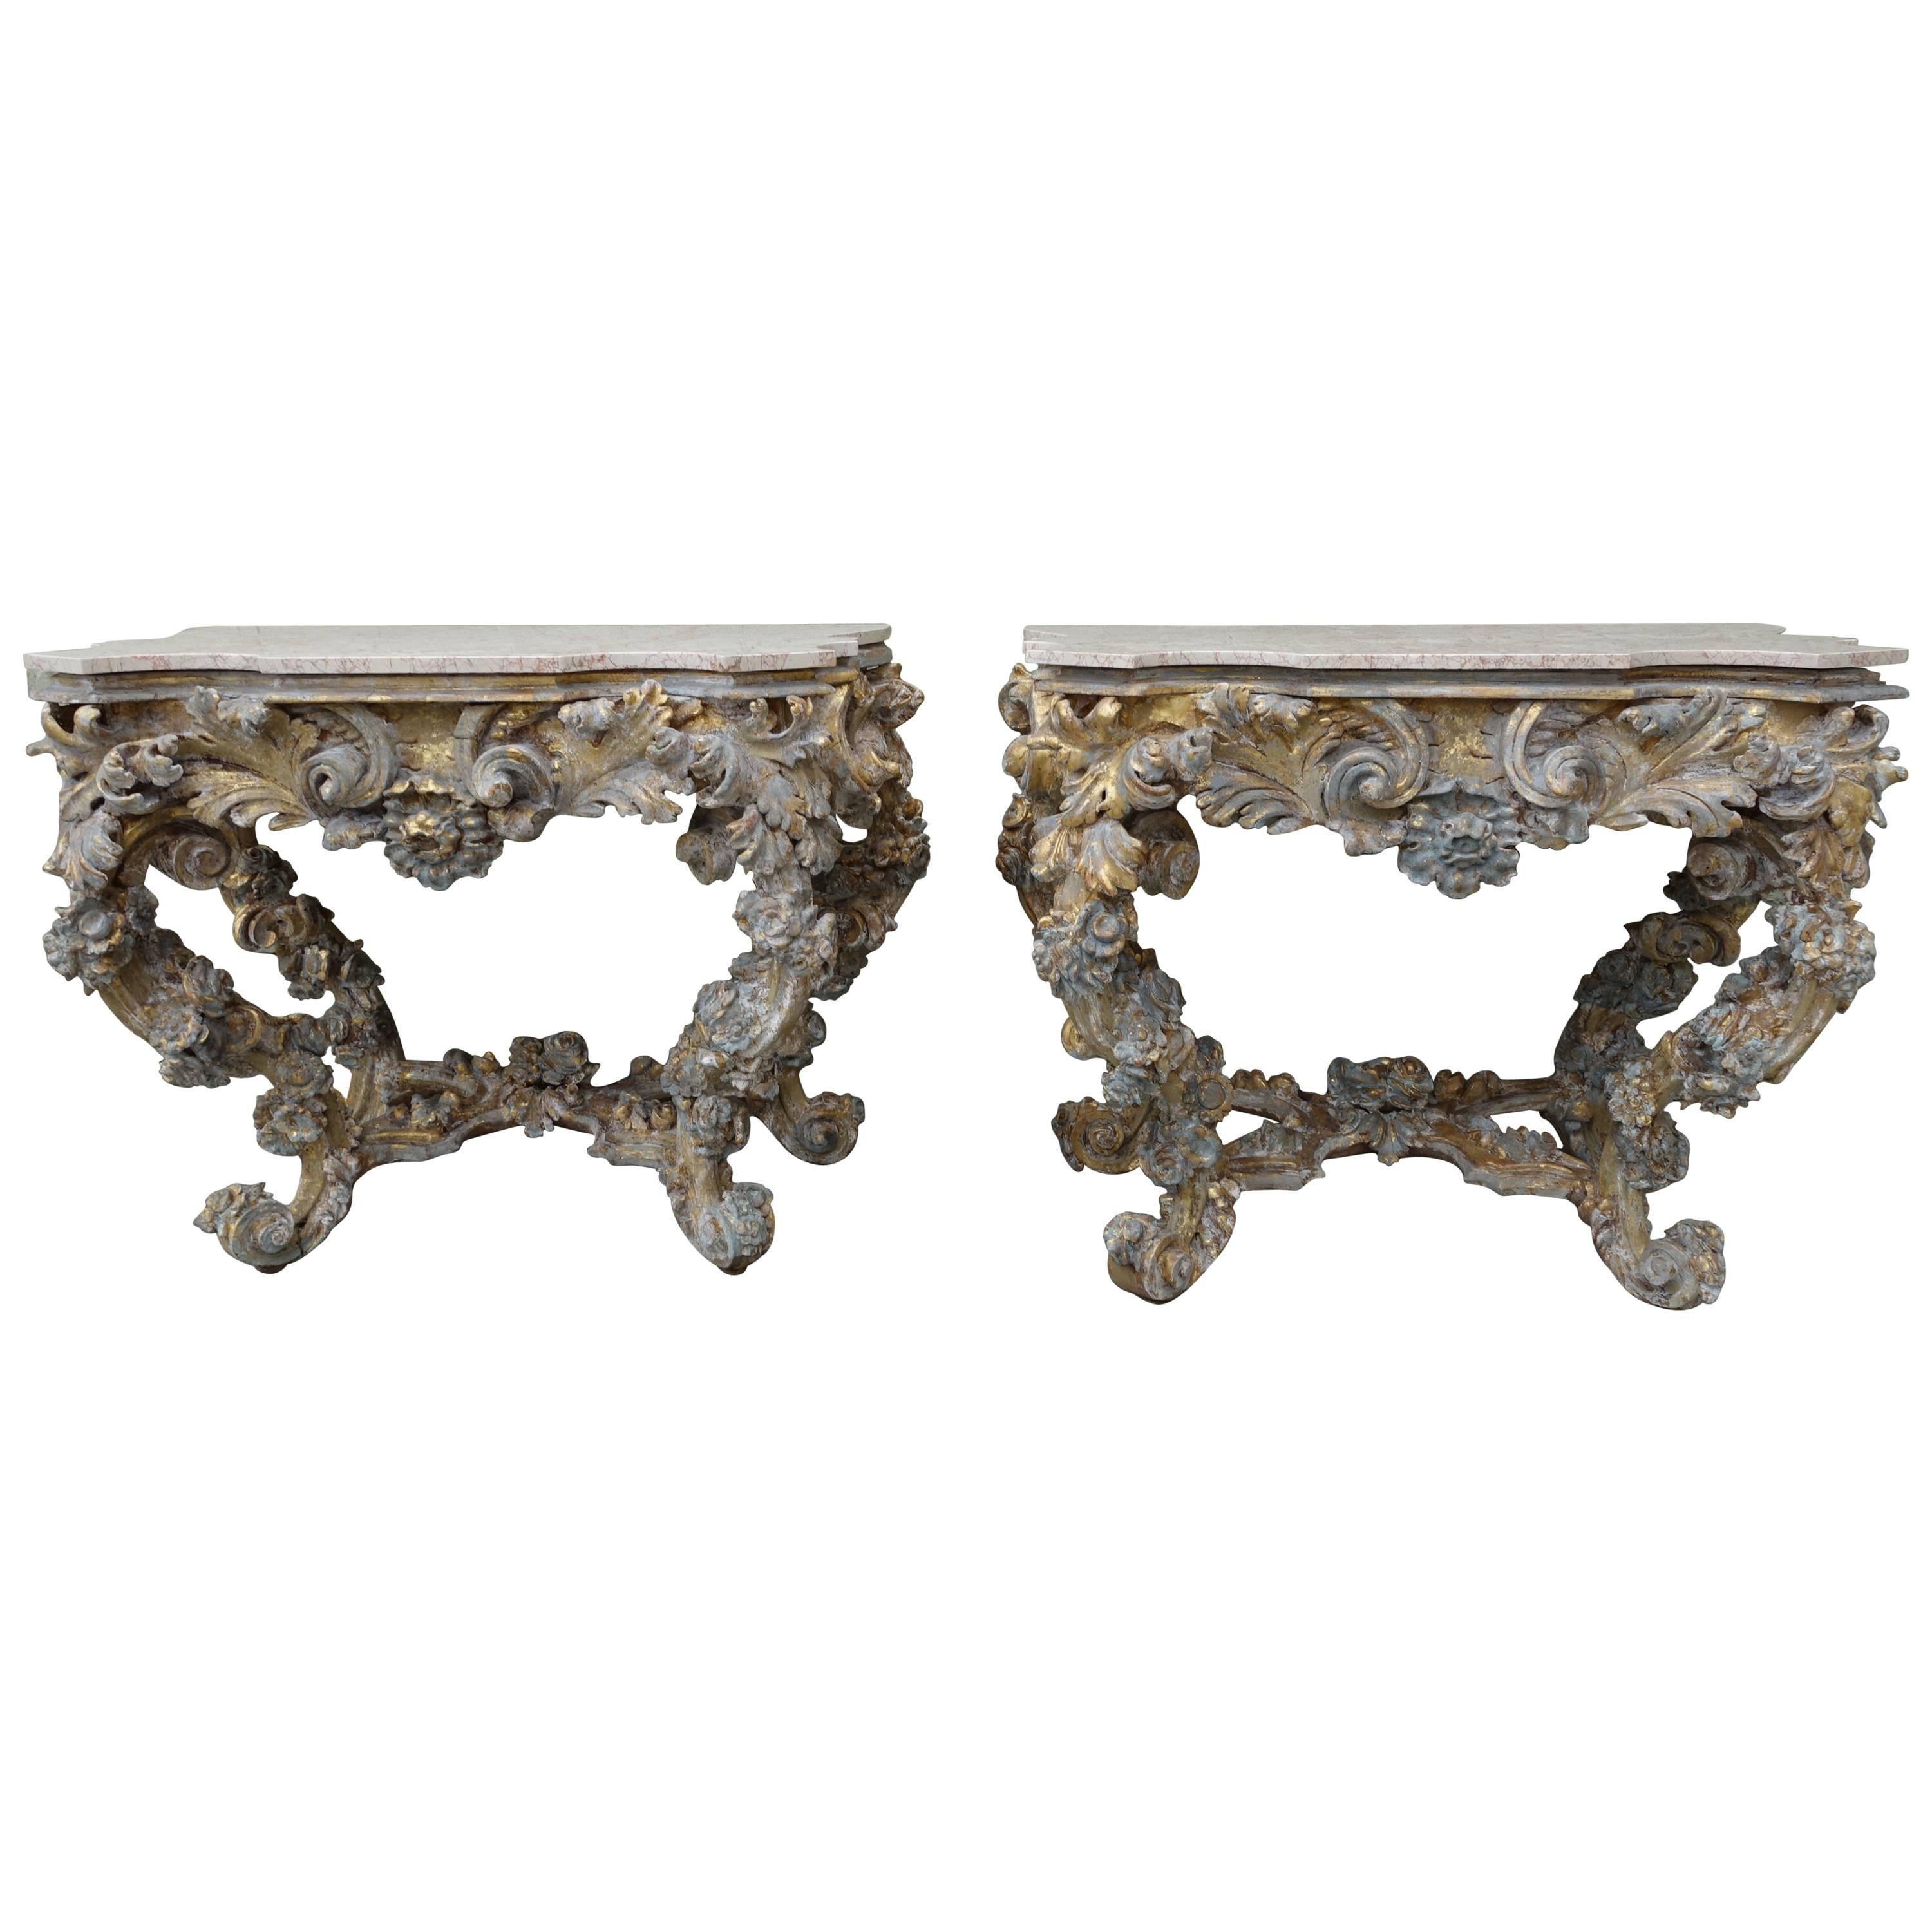 Pair of 19th Century French Rococo Style Consoles